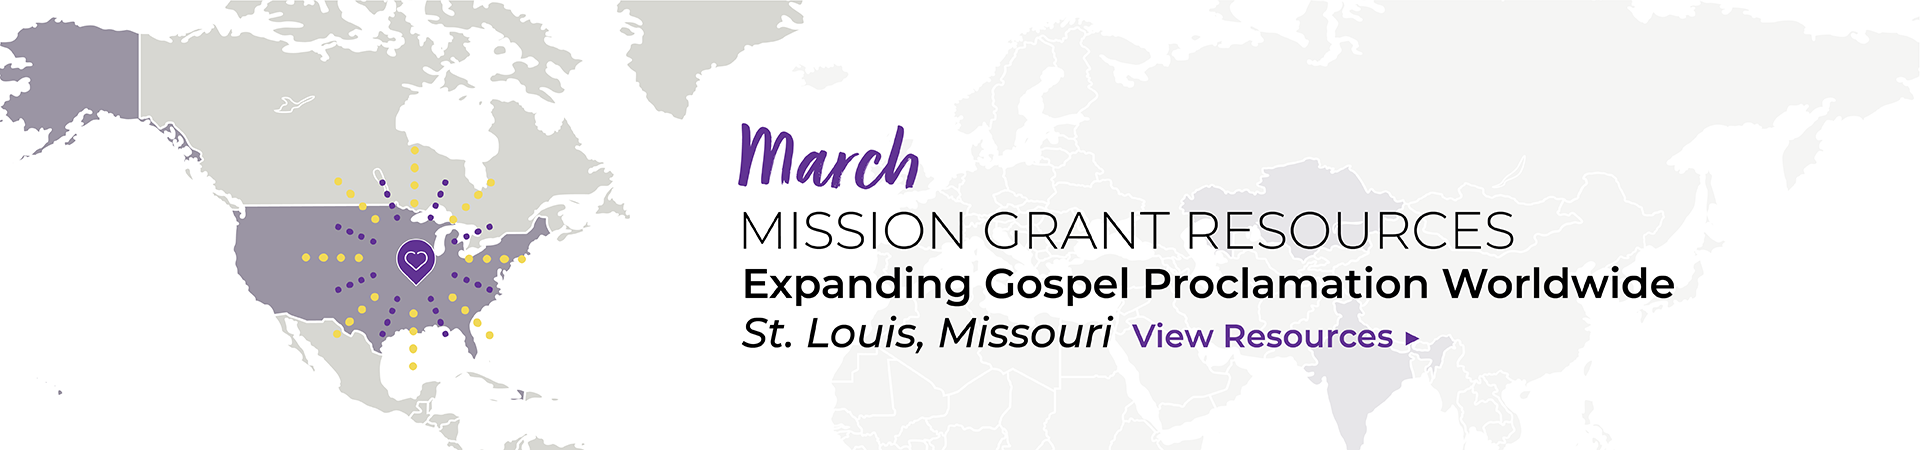 March Mission Grant Resources: Expanding Gospel Proclamation Worldwide. View Resources.